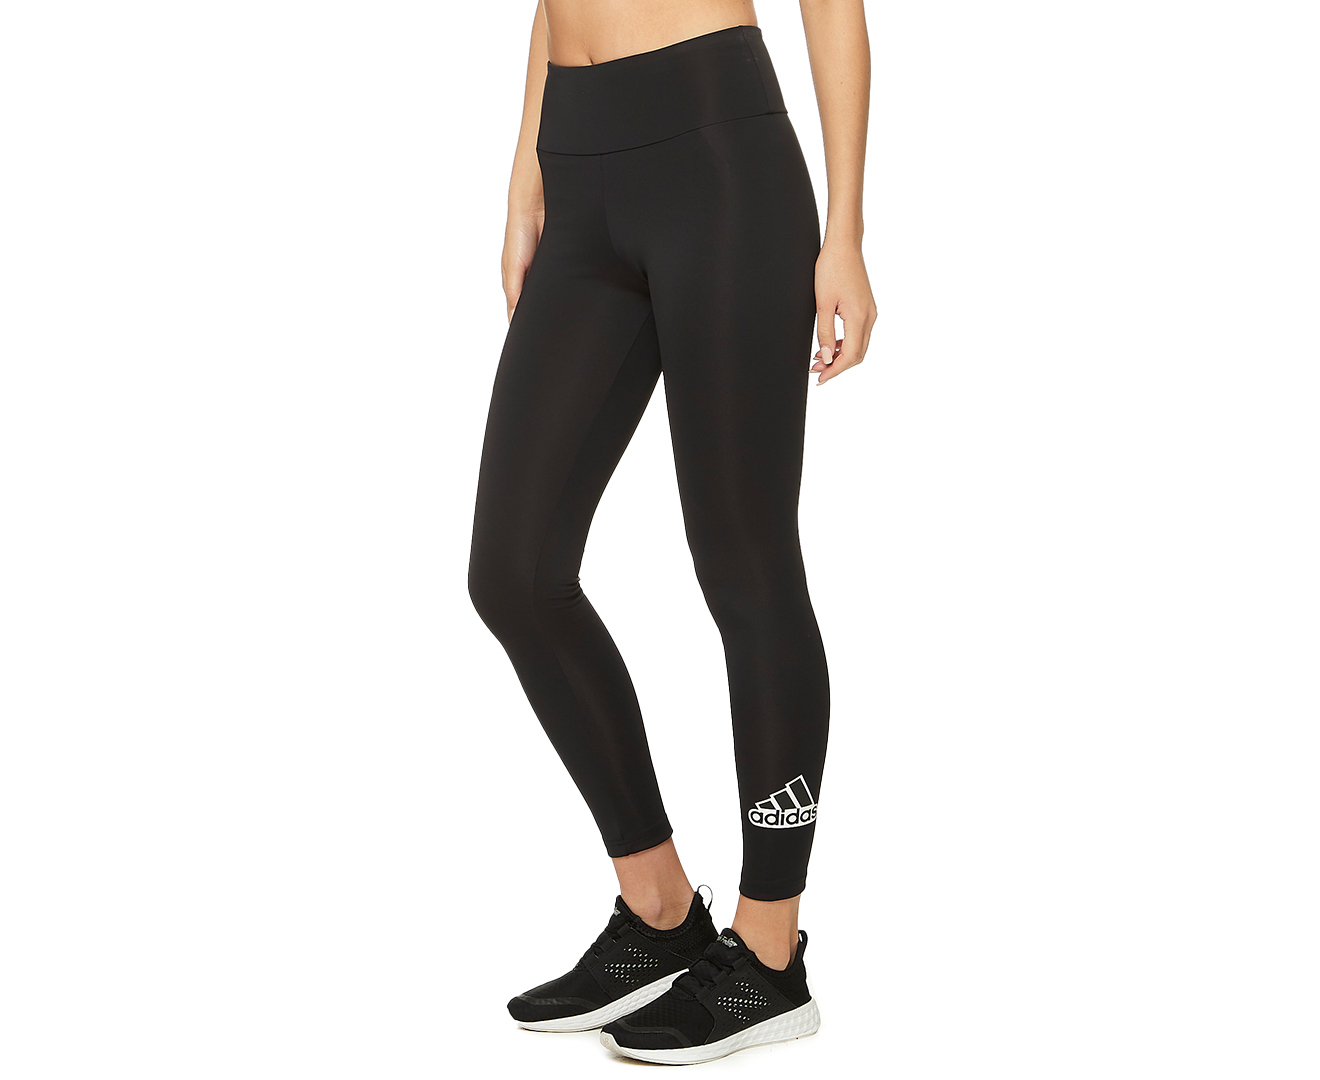 Adidas Women's Designed To Move Tights / Leggings - Black | Catch.co.nz